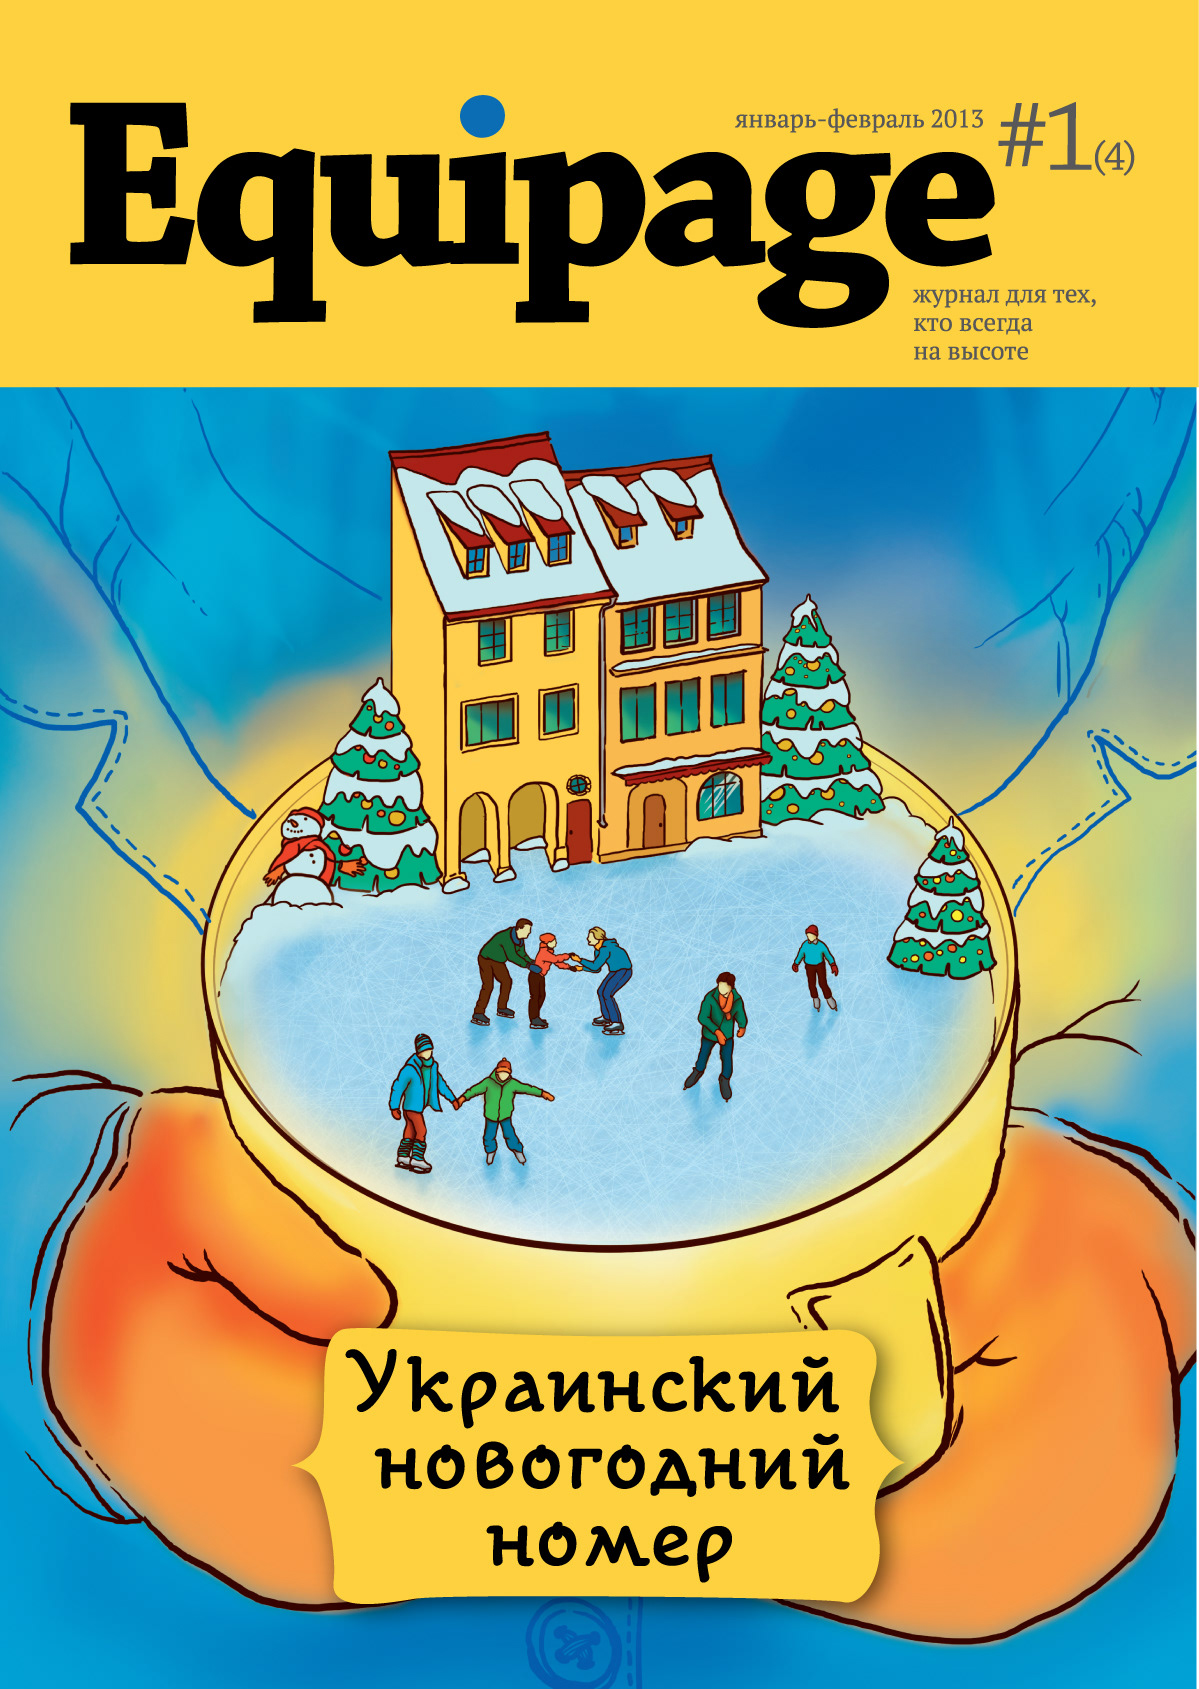 equipage magazine Airlines ukraine Office man tetris spring winter holidays Christmas cover vector flat inflight